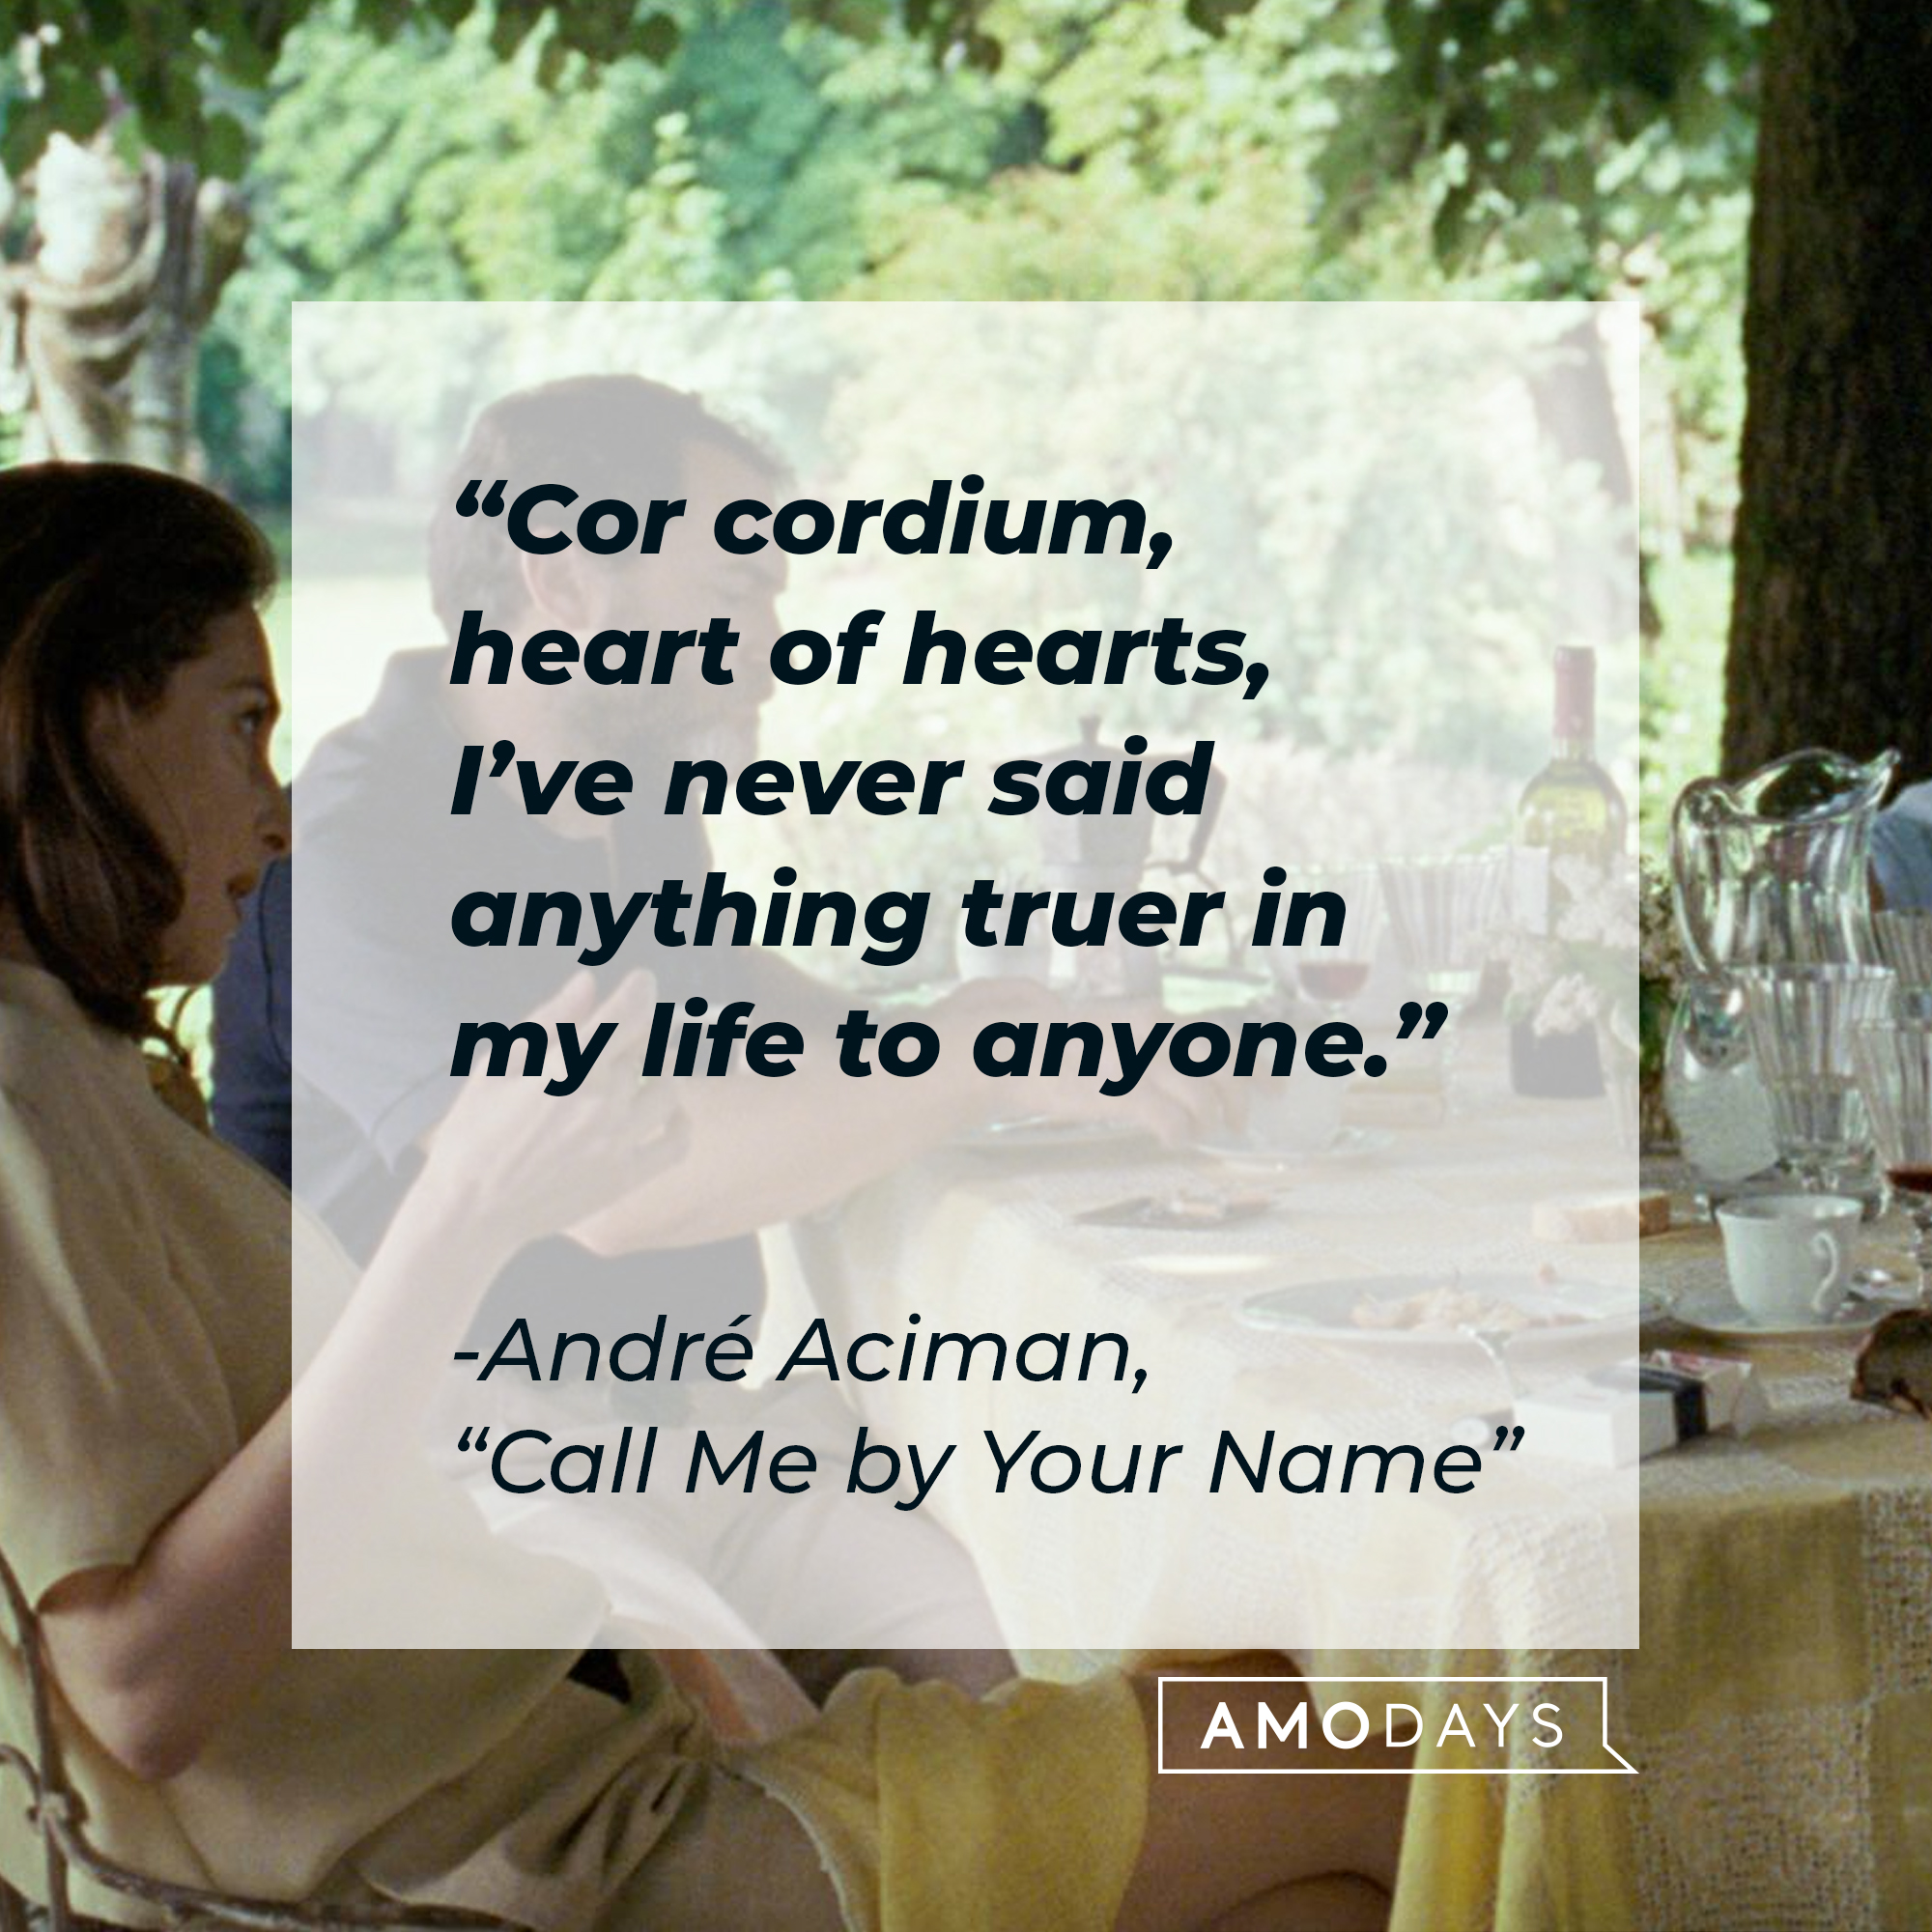 Characters from the film “Call Me By Your Name,” with a quote by the author, André Aciman, from the book it’s based on: "Cor cordium, heart of hearts, I’ve never said anything truer in my life to anyone." | Source: Facebook.com/CallMeByYourNameFilm